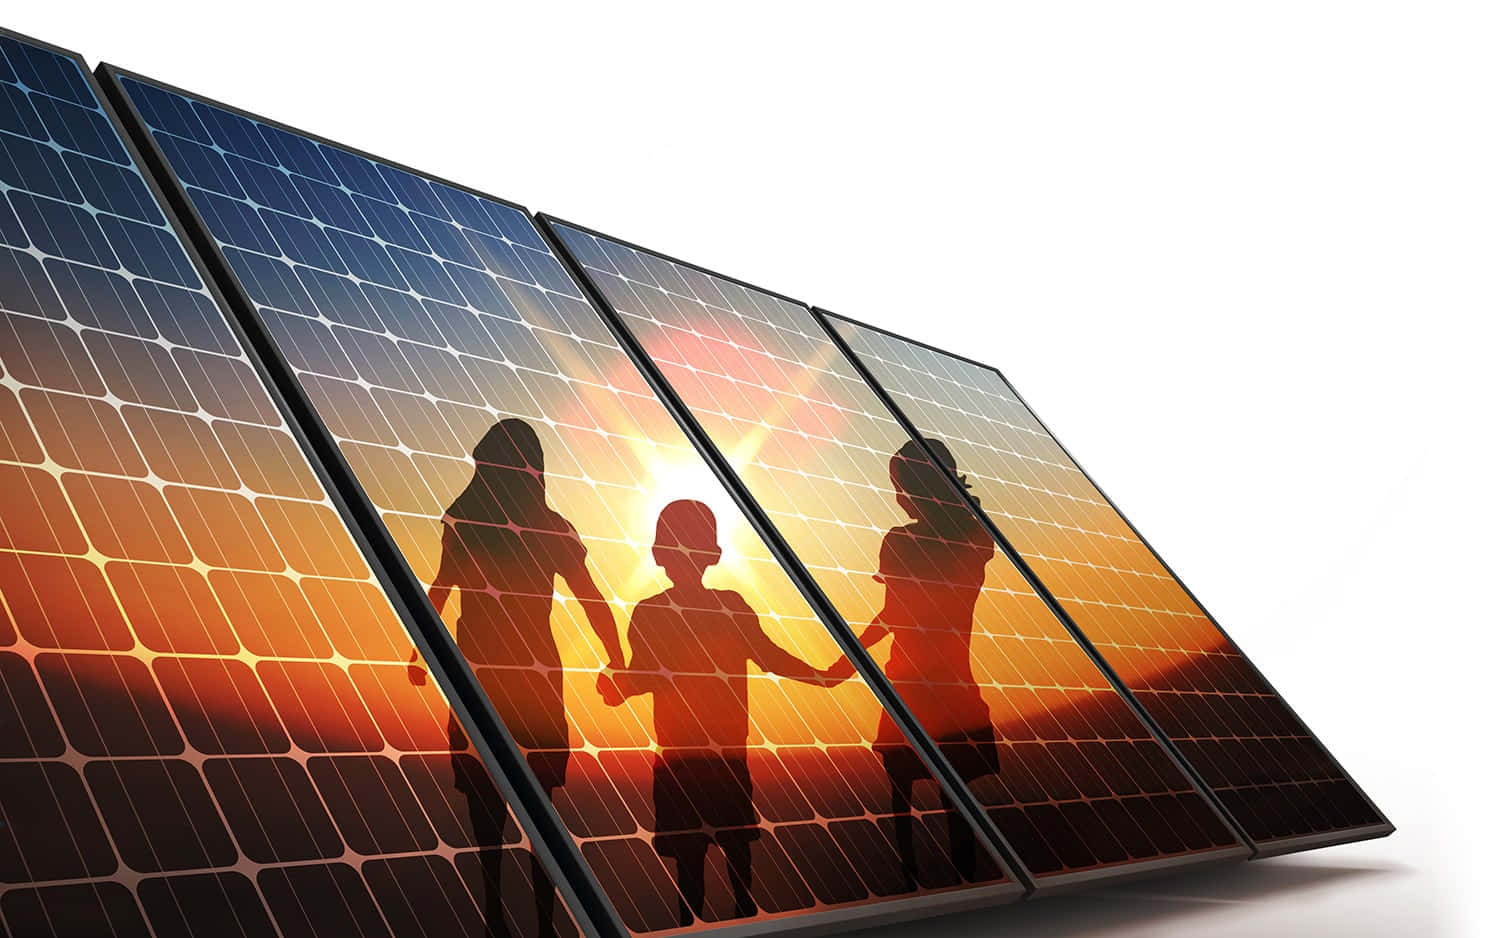 Solar Panel With Kids Silhouette During Sunset Picture